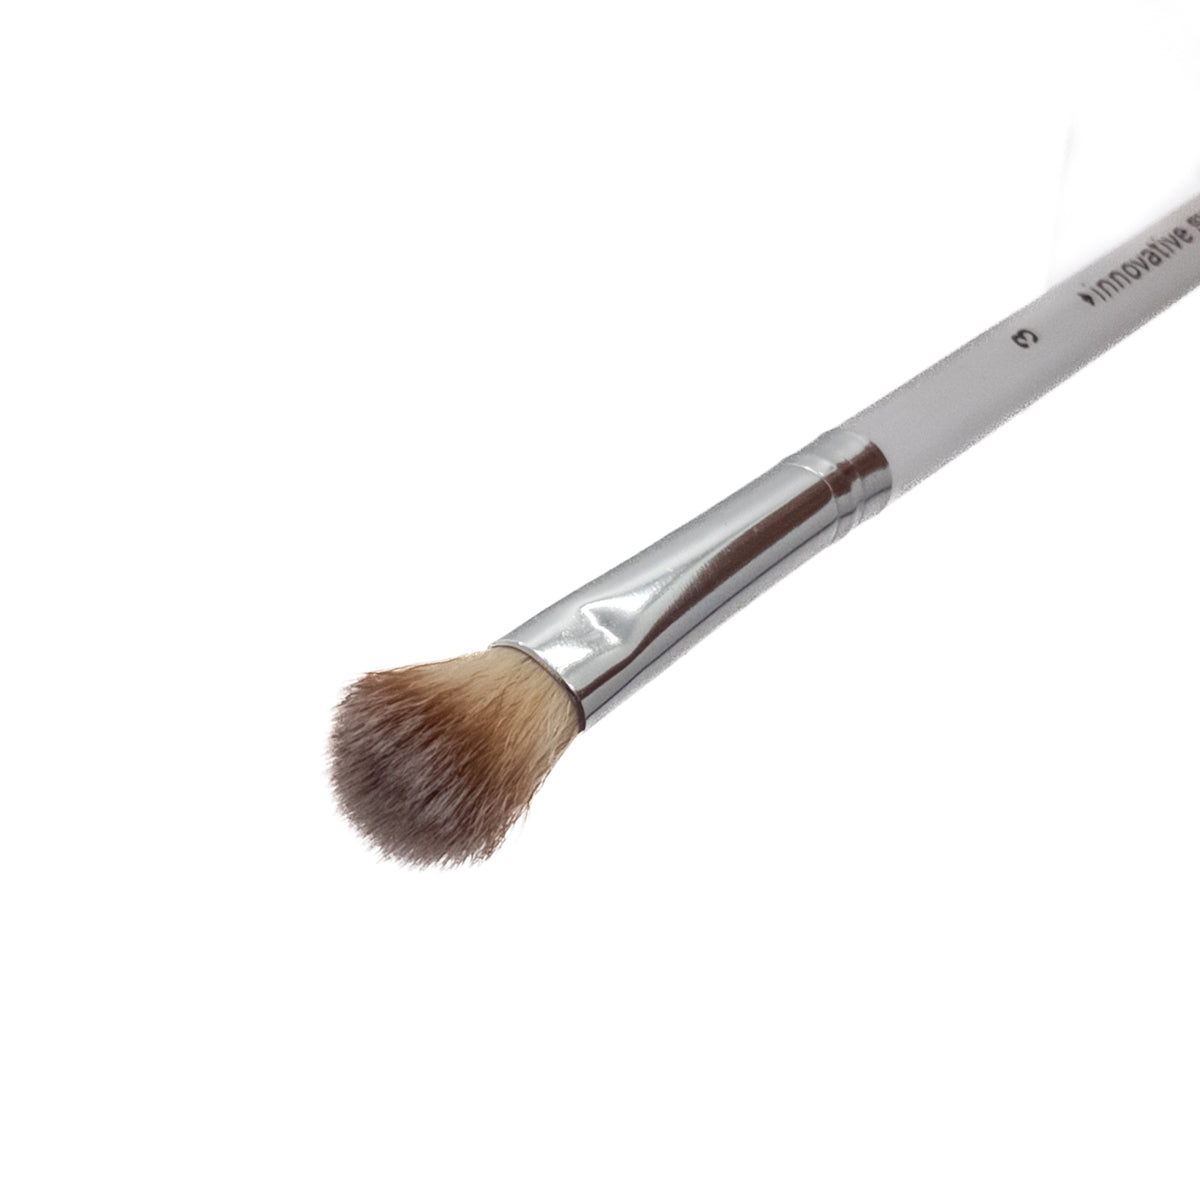 Small Oval Fluffy Brush